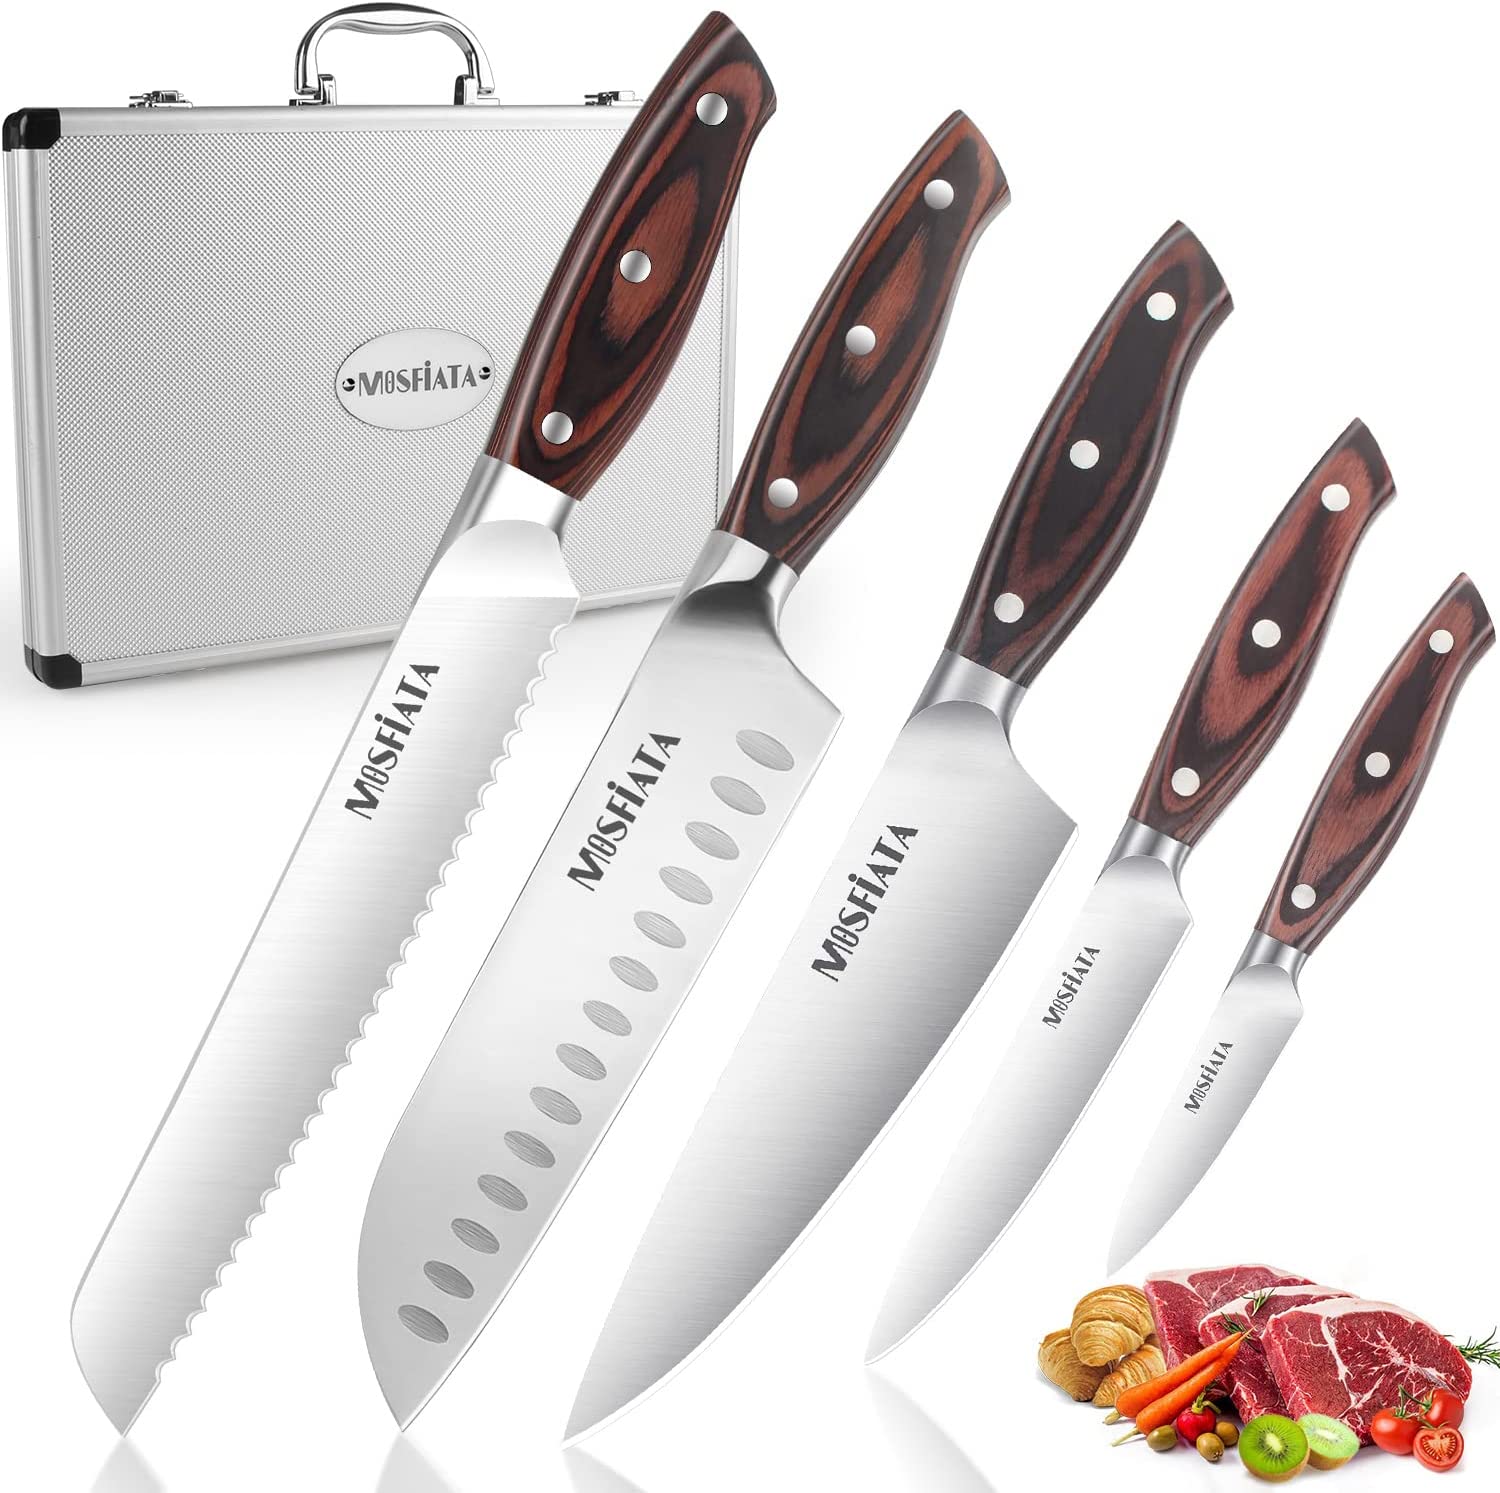 MOSFiATA 5 PCS Chef Knife Set, German High Carbon Stainless Steel Kitchen Knife  Set with Sharpener Rod，5PCS Blade Guard,Wood Handle Knives Set for Kitchen  with Gift Box - Yahoo Shopping